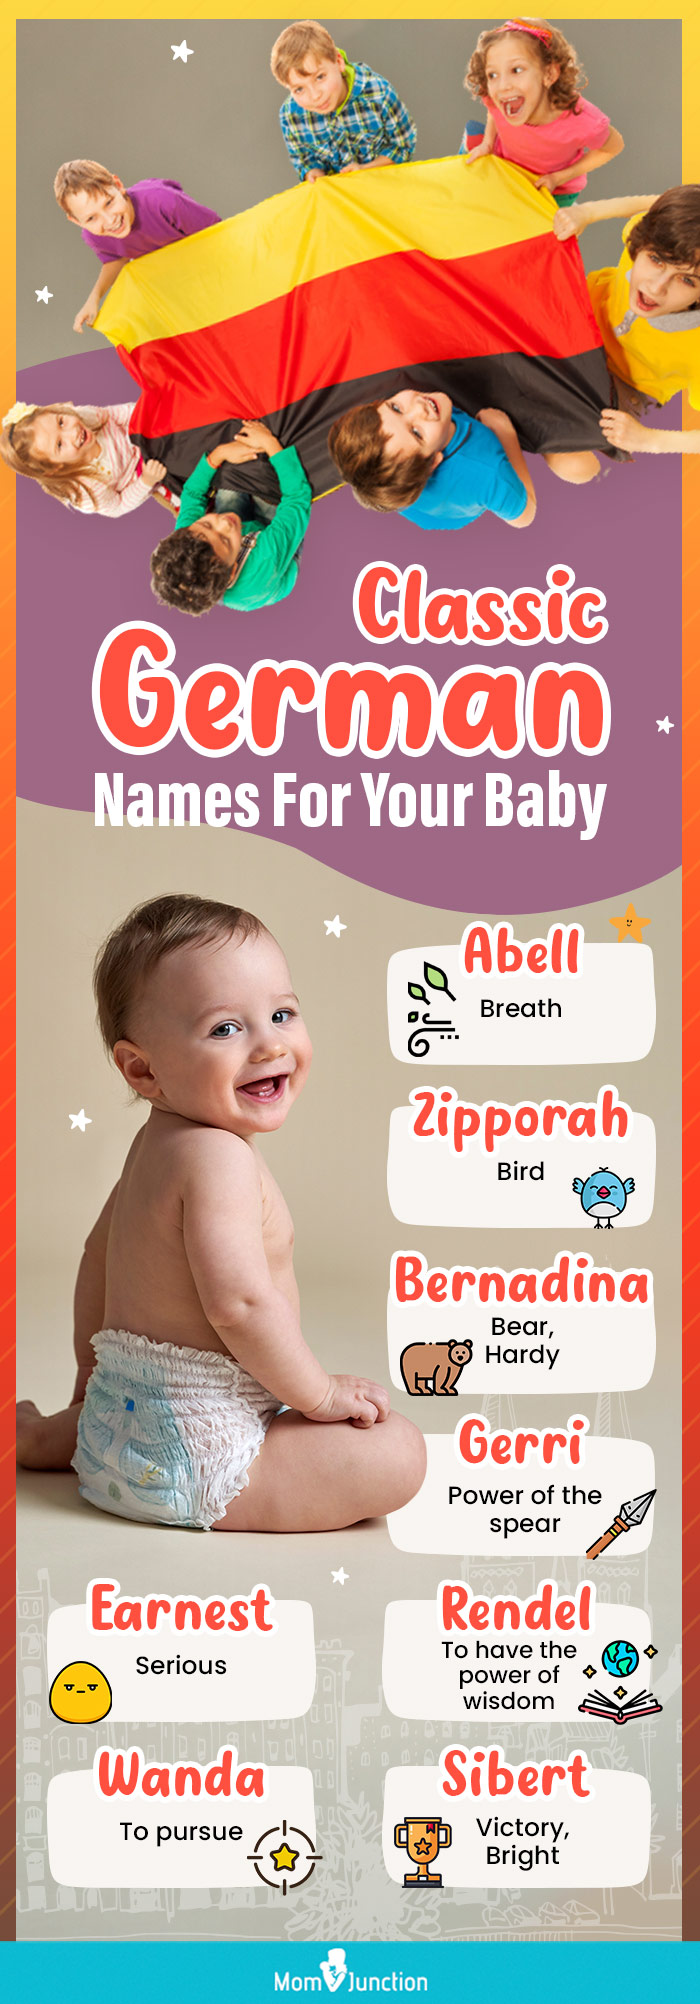 classic german names for your baby (infographic)